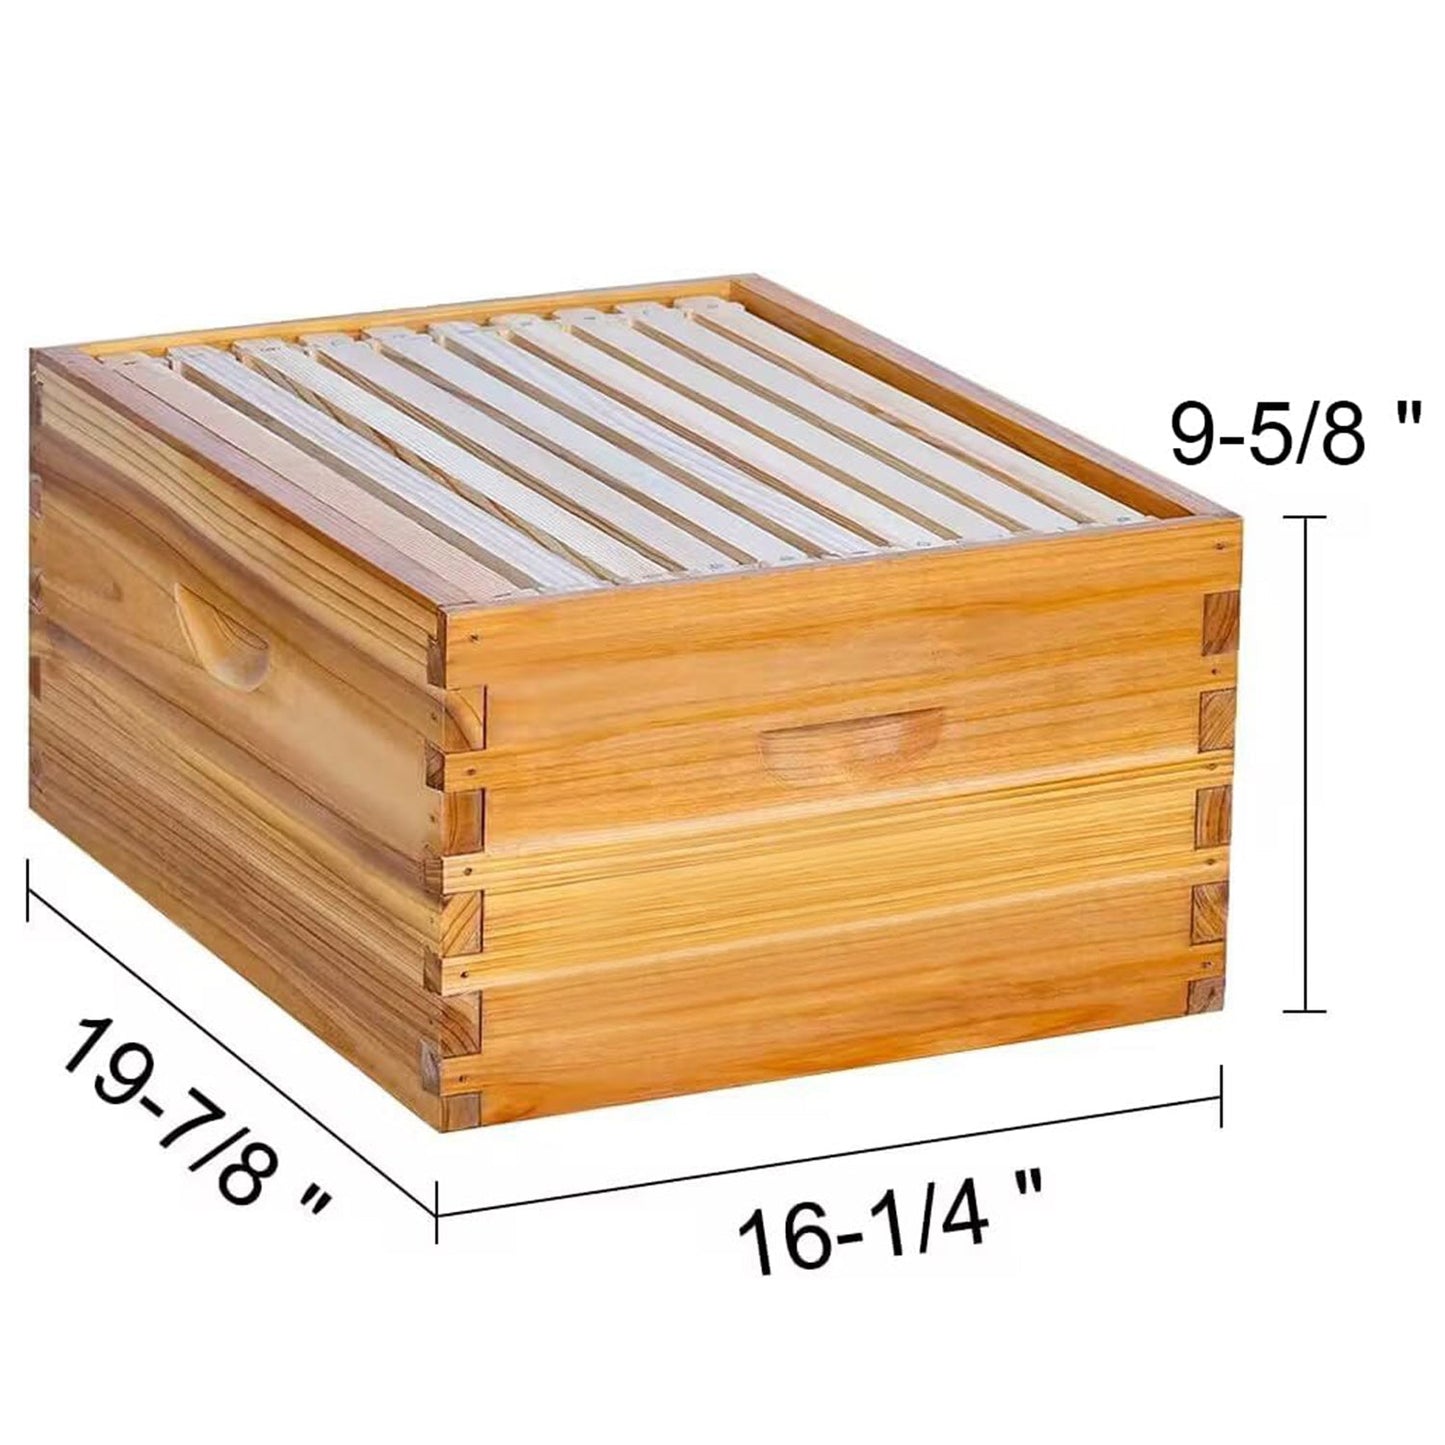 A 10-frame deep box for beehives typically has dimensions of around 16 1/4 inches (41.28 cm) in width, 19 7/8 inches (50.48 cm) in length, and 9 5/8 inches (24.45 cm) in height.